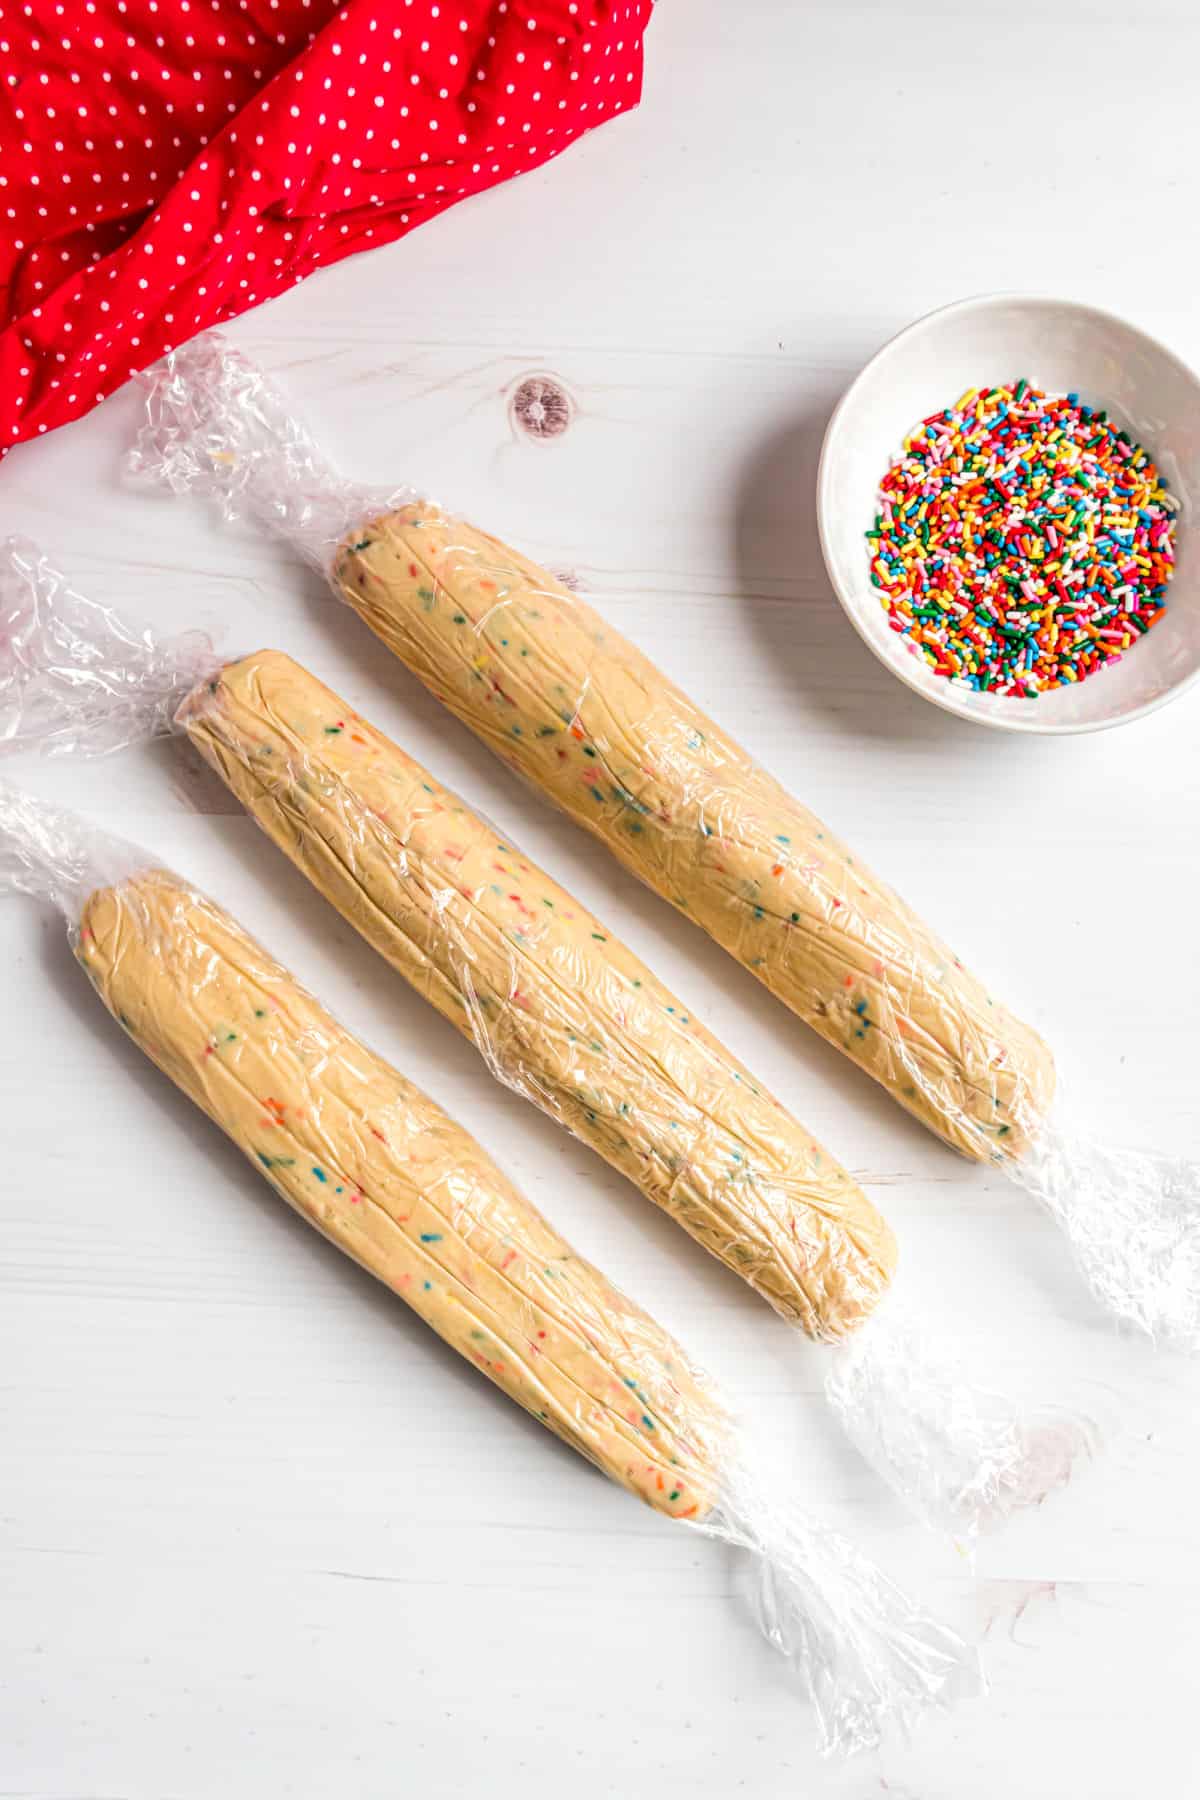 Three logs of icebox cookie dough wrapped in plastic wrap.